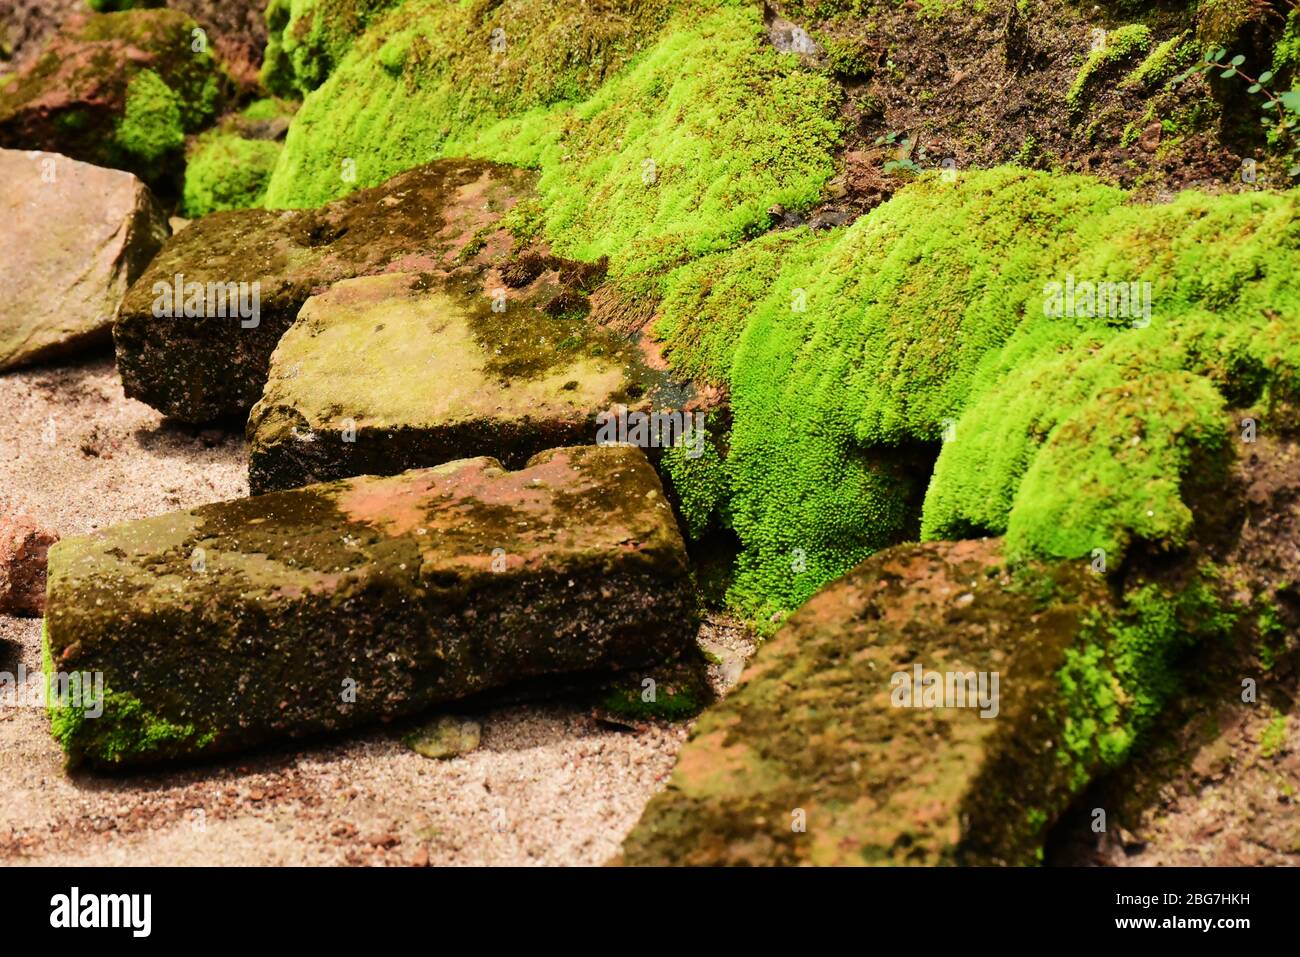 Moss on bricks and base of a house in Rwanda, East Africa Stock Photo